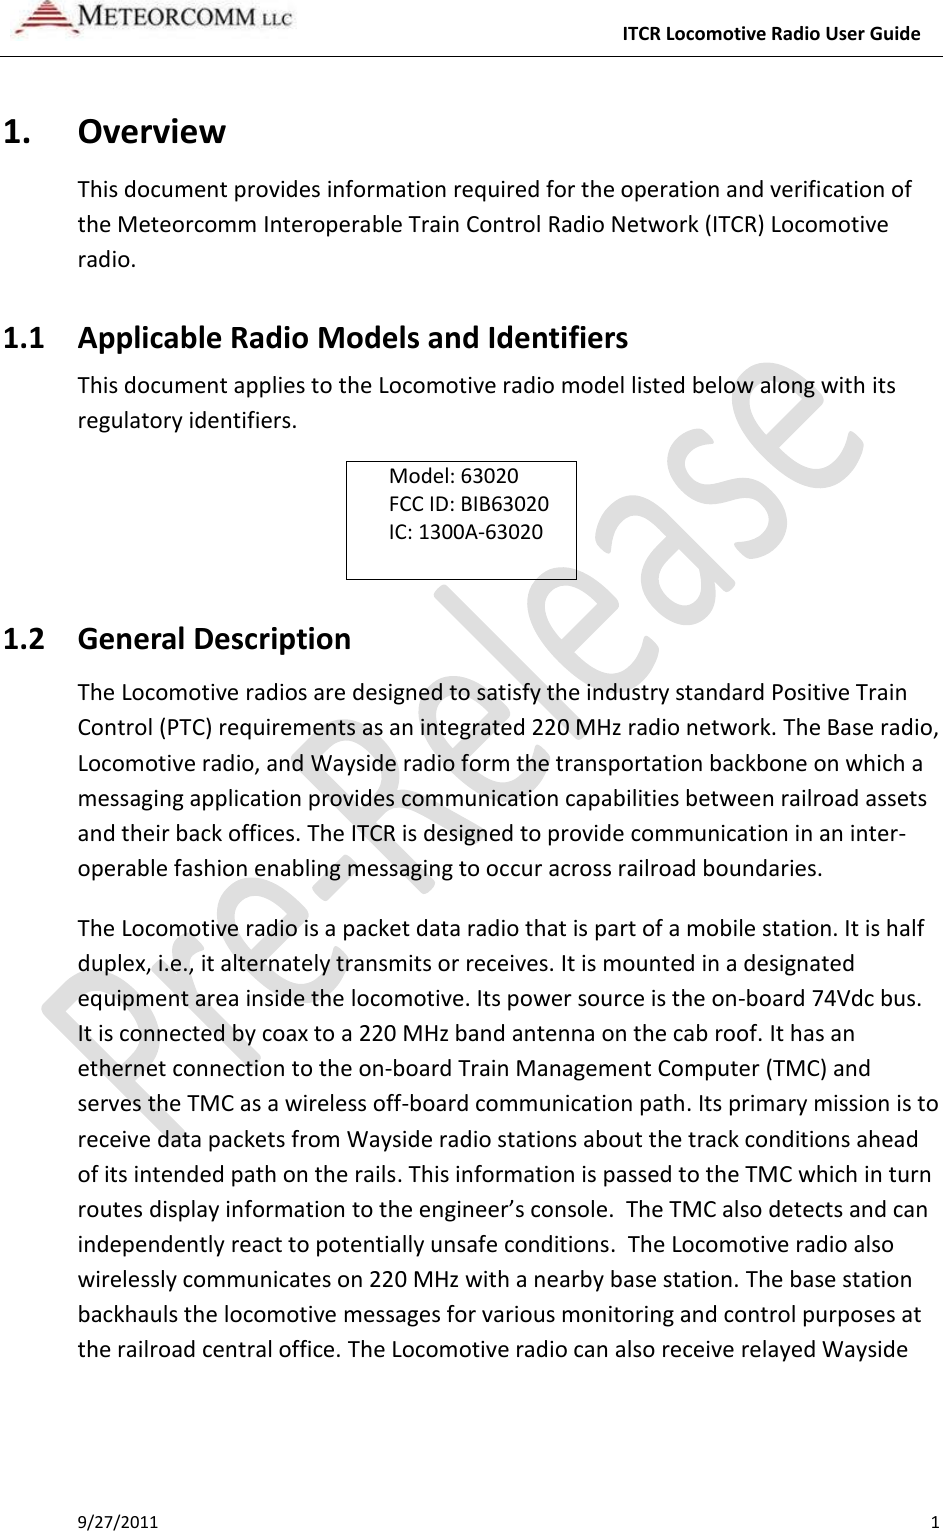     ITCR Locomotive Radio User Guide 9/27/2011    1 1. Overview This document provides information required for the operation and verification of the Meteorcomm Interoperable Train Control Radio Network (ITCR) Locomotive radio. 1.1 Applicable Radio Models and Identifiers This document applies to the Locomotive radio model listed below along with its regulatory identifiers.  Model: 63020 FCC ID: BIB63020 IC: 1300A-63020  1.2 General Description The Locomotive radios are designed to satisfy the industry standard Positive Train Control (PTC) requirements as an integrated 220 MHz radio network. The Base radio, Locomotive radio, and Wayside radio form the transportation backbone on which a messaging application provides communication capabilities between railroad assets and their back offices. The ITCR is designed to provide communication in an inter-operable fashion enabling messaging to occur across railroad boundaries.  The Locomotive radio is a packet data radio that is part of a mobile station. It is half duplex, i.e., it alternately transmits or receives. It is mounted in a designated equipment area inside the locomotive. Its power source is the on-board 74Vdc bus. It is connected by coax to a 220 MHz band antenna on the cab roof. It has an ethernet connection to the on-board Train Management Computer (TMC) and serves the TMC as a wireless off-board communication path. Its primary mission is to receive data packets from Wayside radio stations about the track conditions ahead of its intended path on the rails. This information is passed to the TMC which in turn routes display information to the engineer’s console.  The TMC also detects and can independently react to potentially unsafe conditions.  The Locomotive radio also wirelessly communicates on 220 MHz with a nearby base station. The base station backhauls the locomotive messages for various monitoring and control purposes at the railroad central office. The Locomotive radio can also receive relayed Wayside 